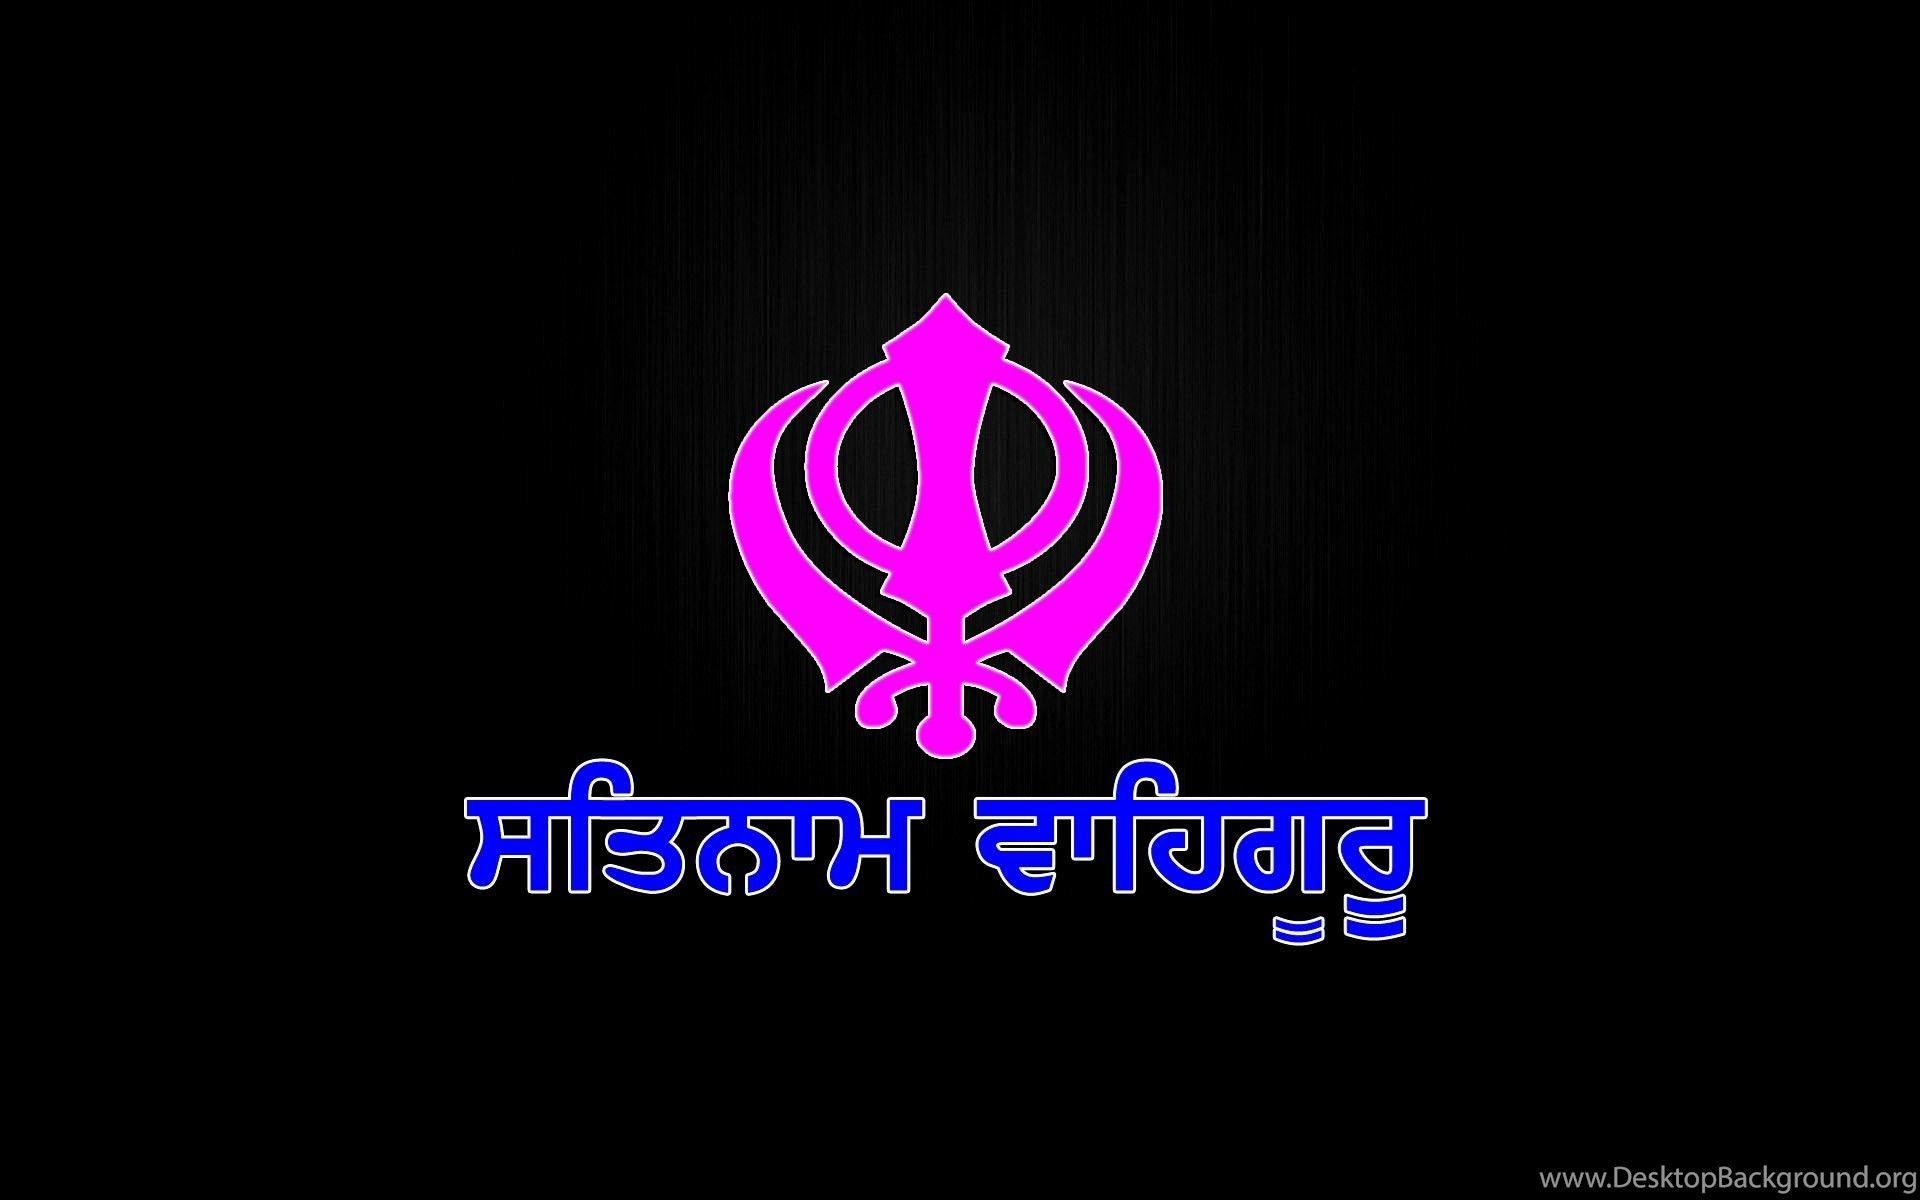 Sikh Symbol HD Wallpaper Gallery and Meanings